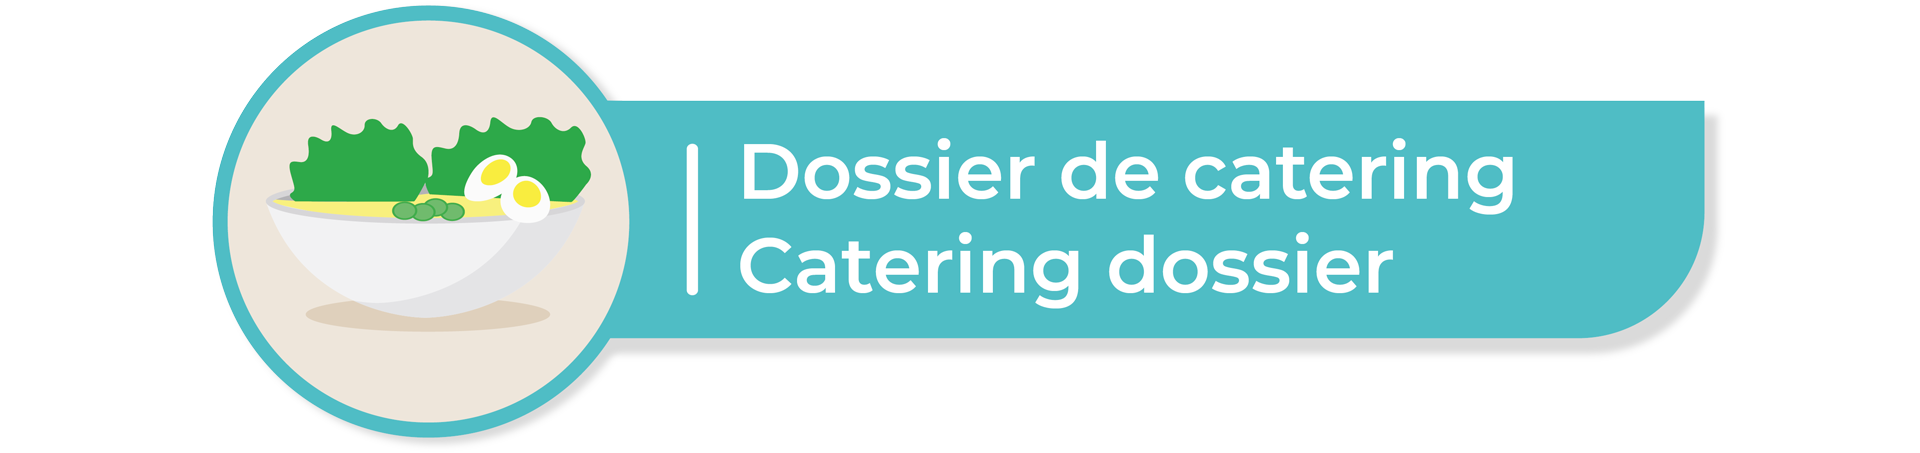 Dossier catering